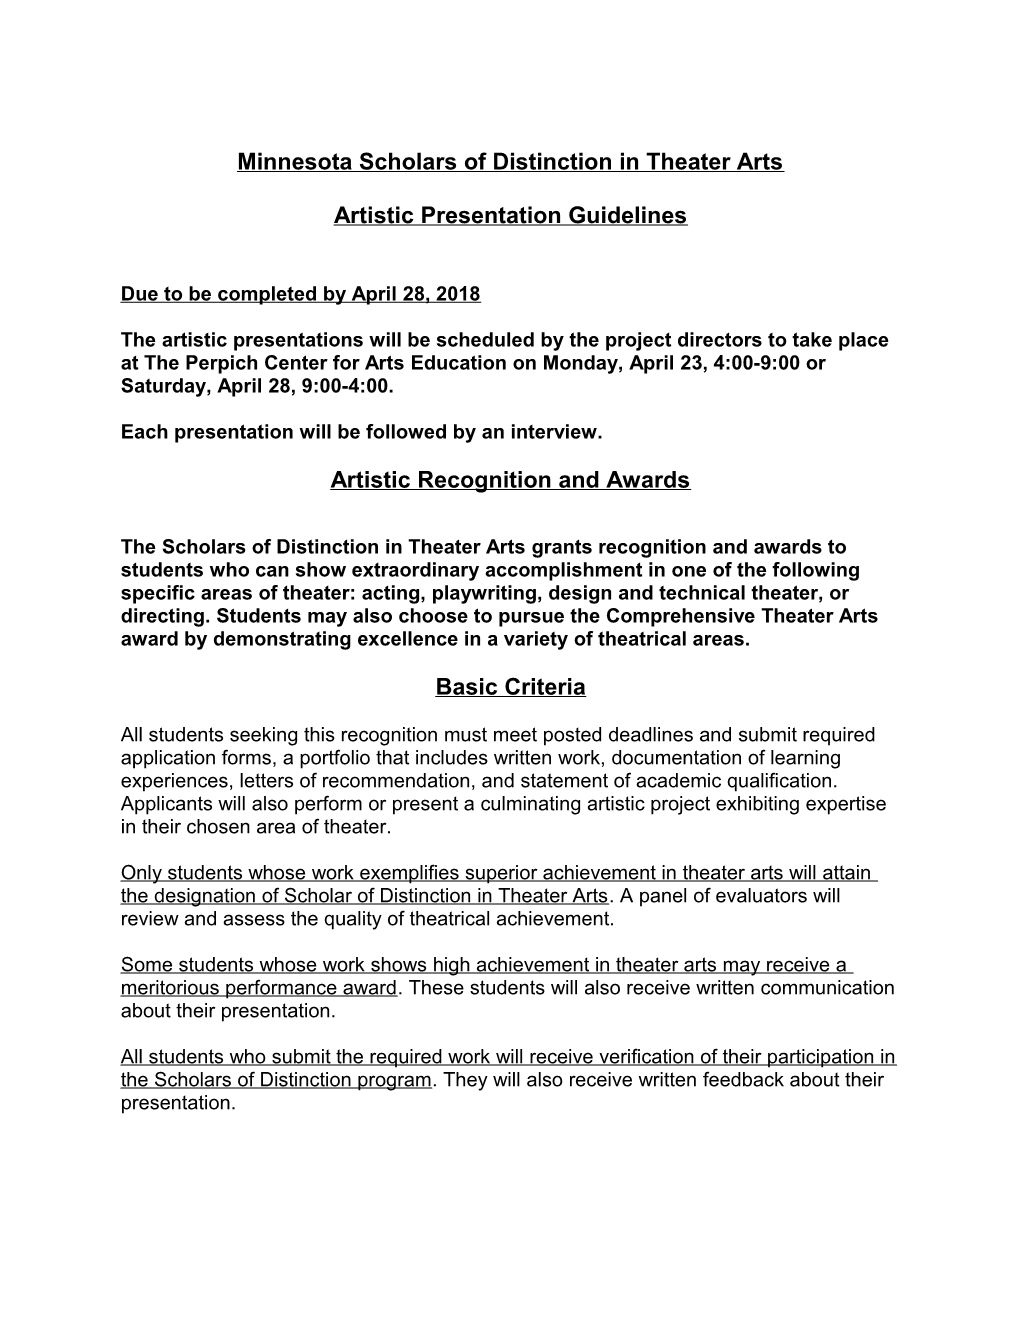 The Scholars of Distinction in Theater Arts Grants Recognition and Monetary Awards to Students